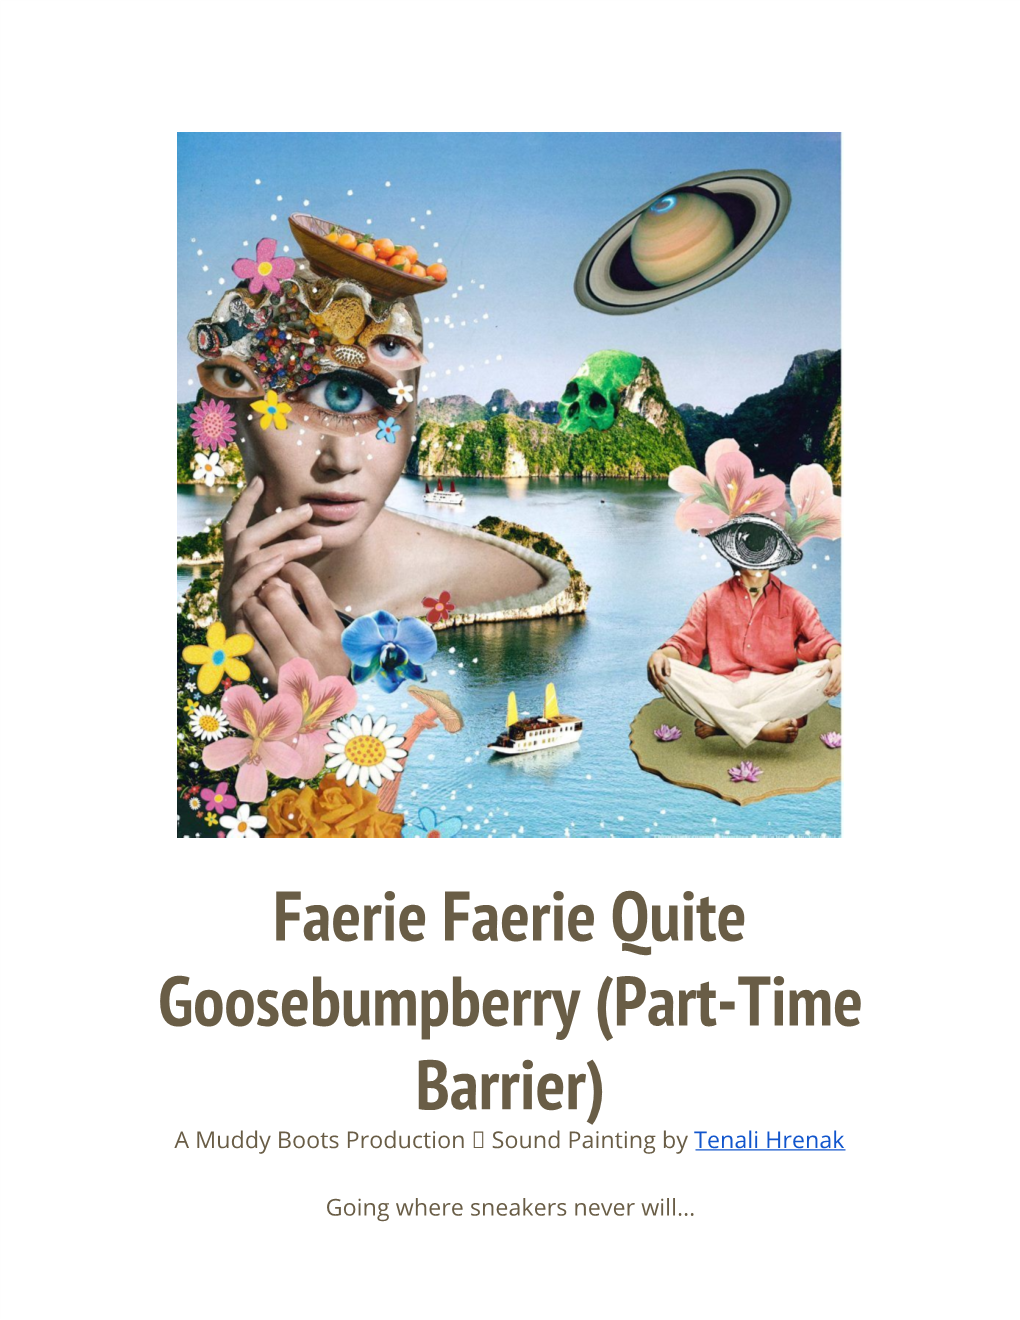 Faerie Faerie Quite Goosebumpberry (Part-Time Barrier) a Muddy Boots Production � Sound Painting by ​Tenali Hrenak